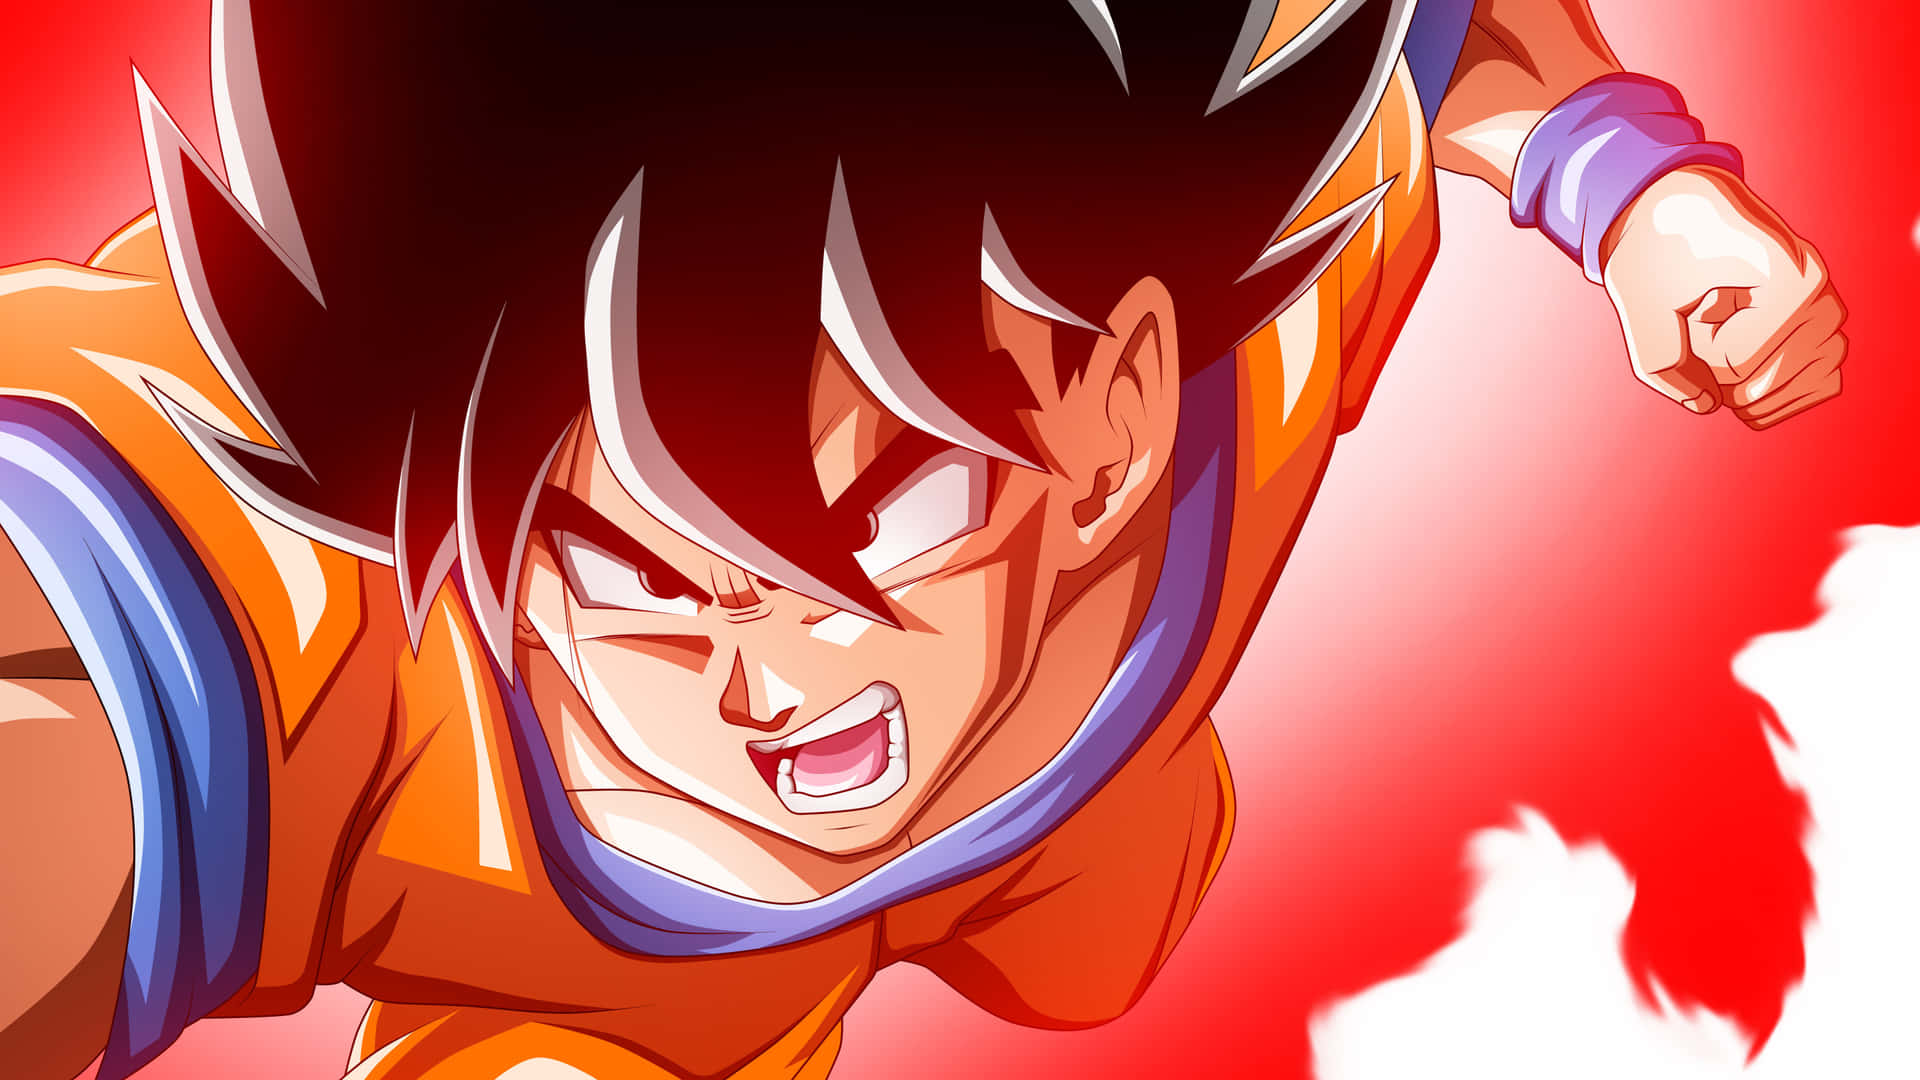 "Experience the ultimate Battle of Gods in Dragon Ball Super"